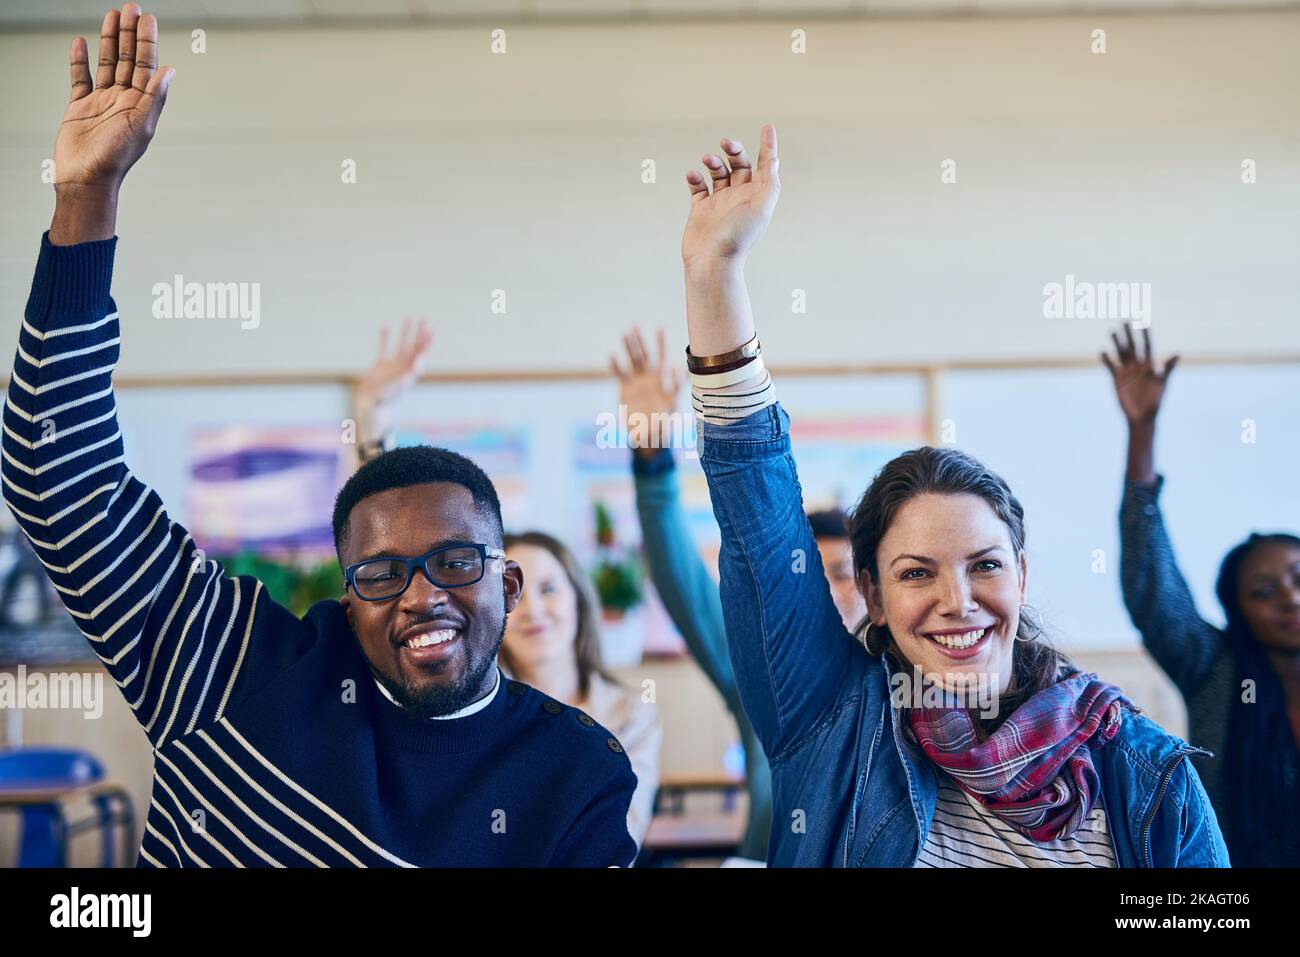 We all want more in life. a group of students raising their hands in class. Stock Photo